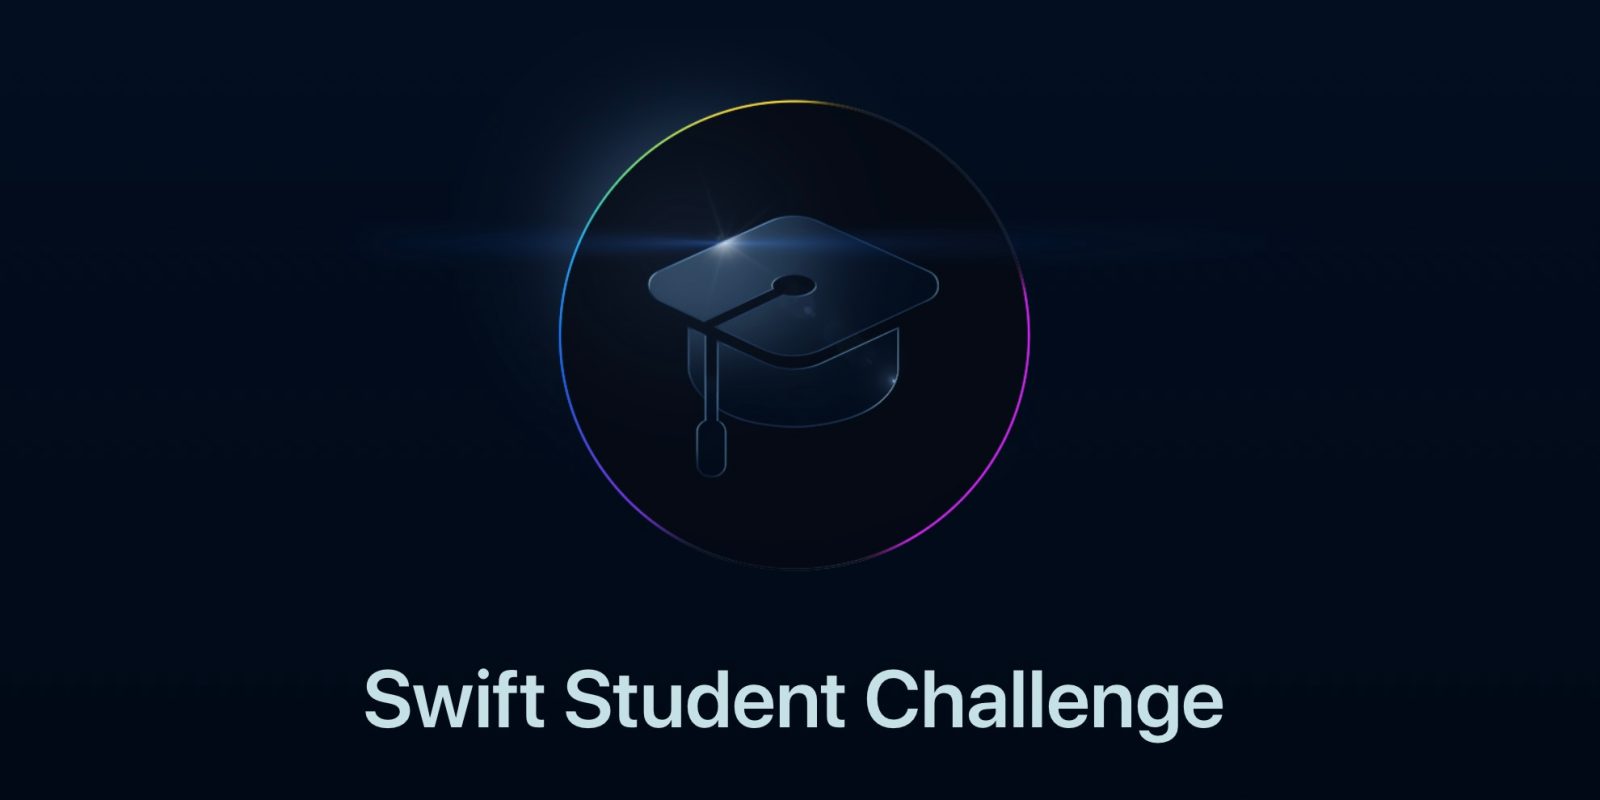 Apple giving AirPods Pro to Swift Challenge winners along with WWDC22 outerwear and pin set